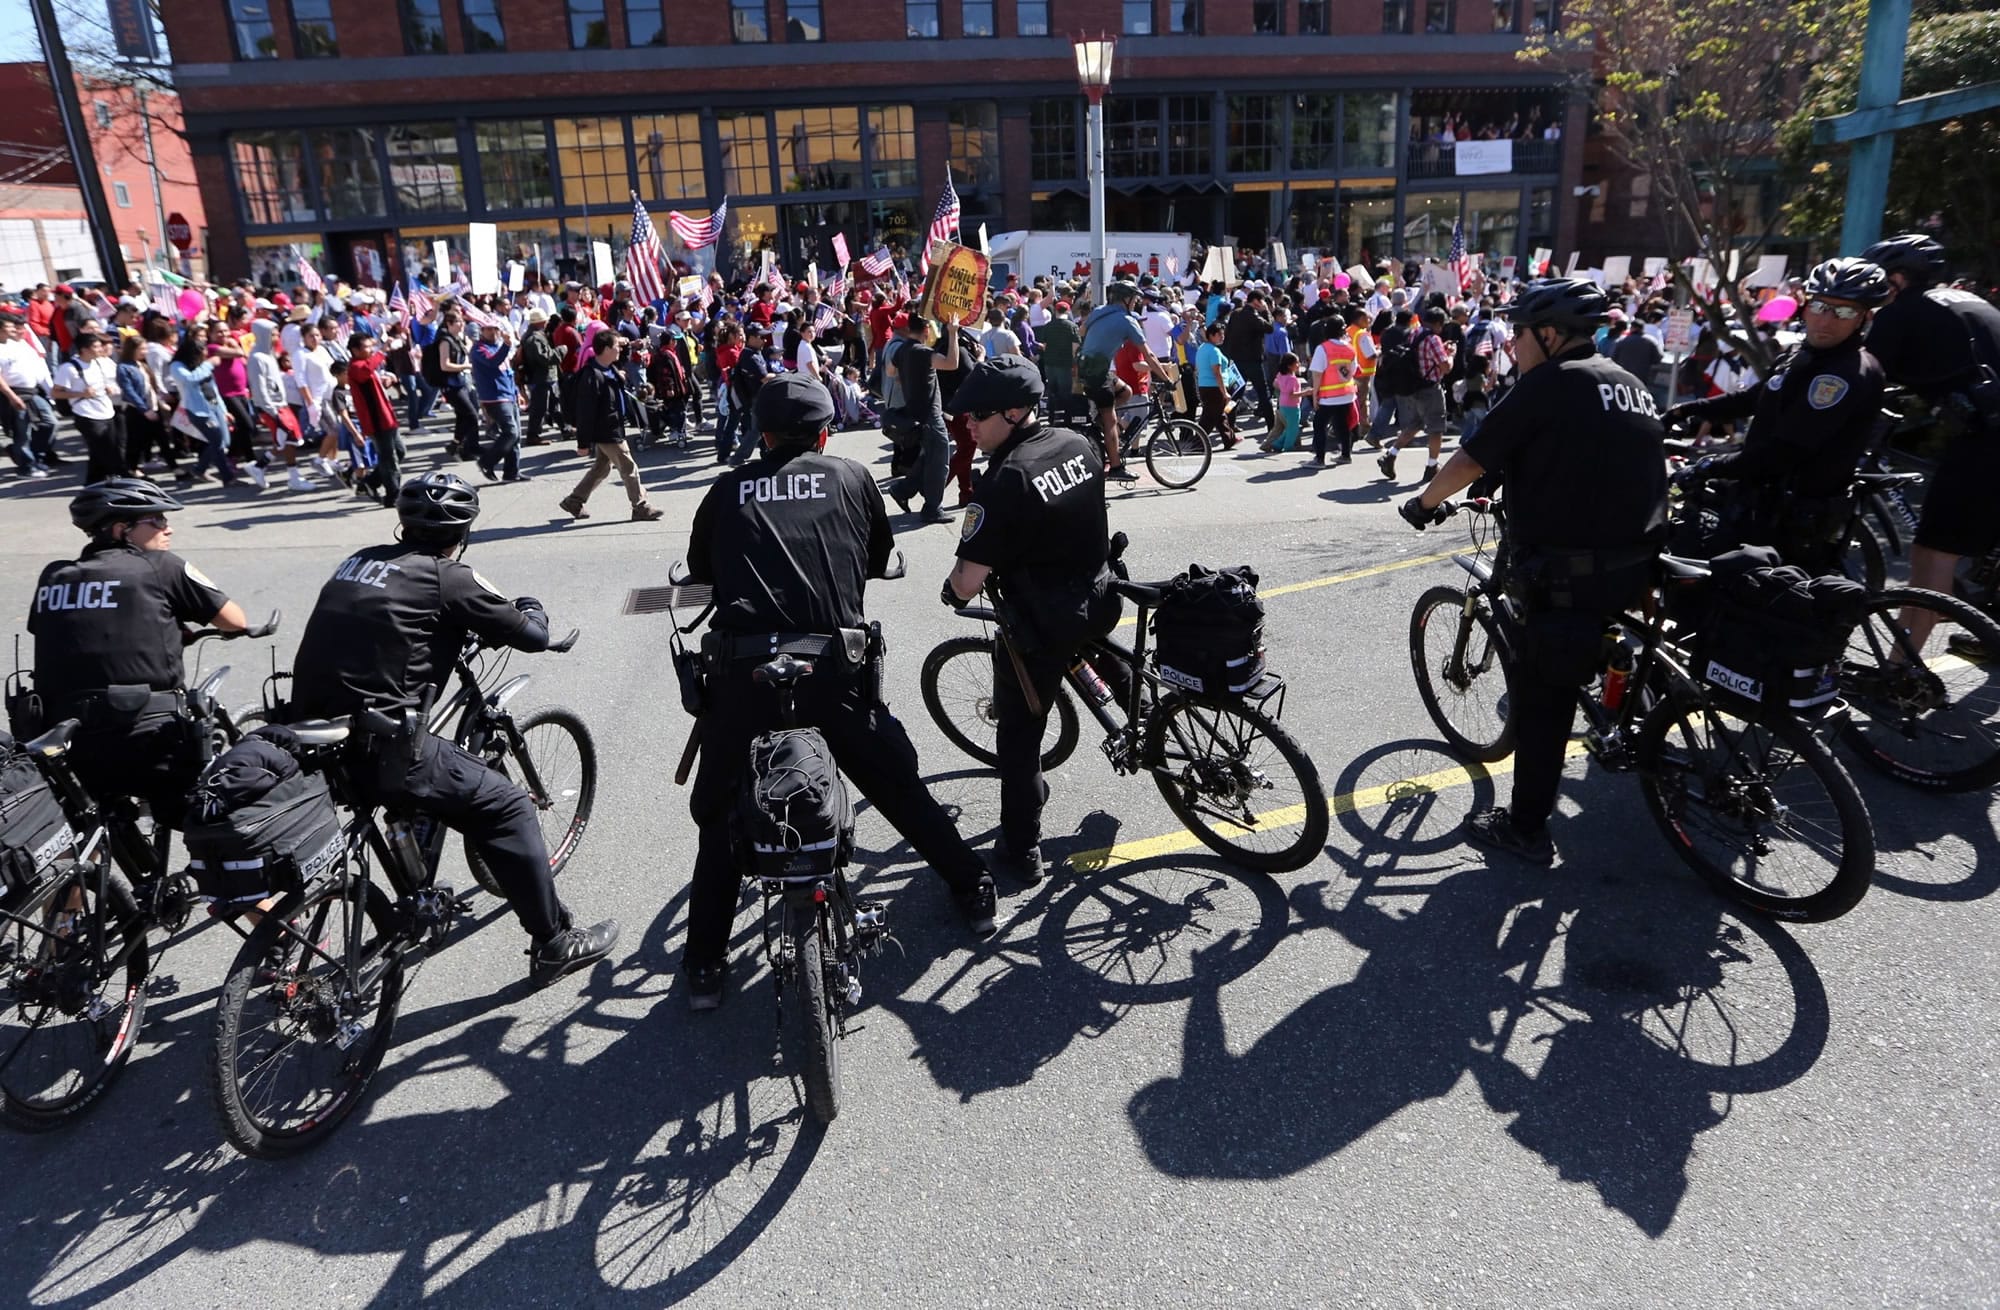 Police keep watch over demonstrators during a May Day rally in downtown Seattle on Wednesday.